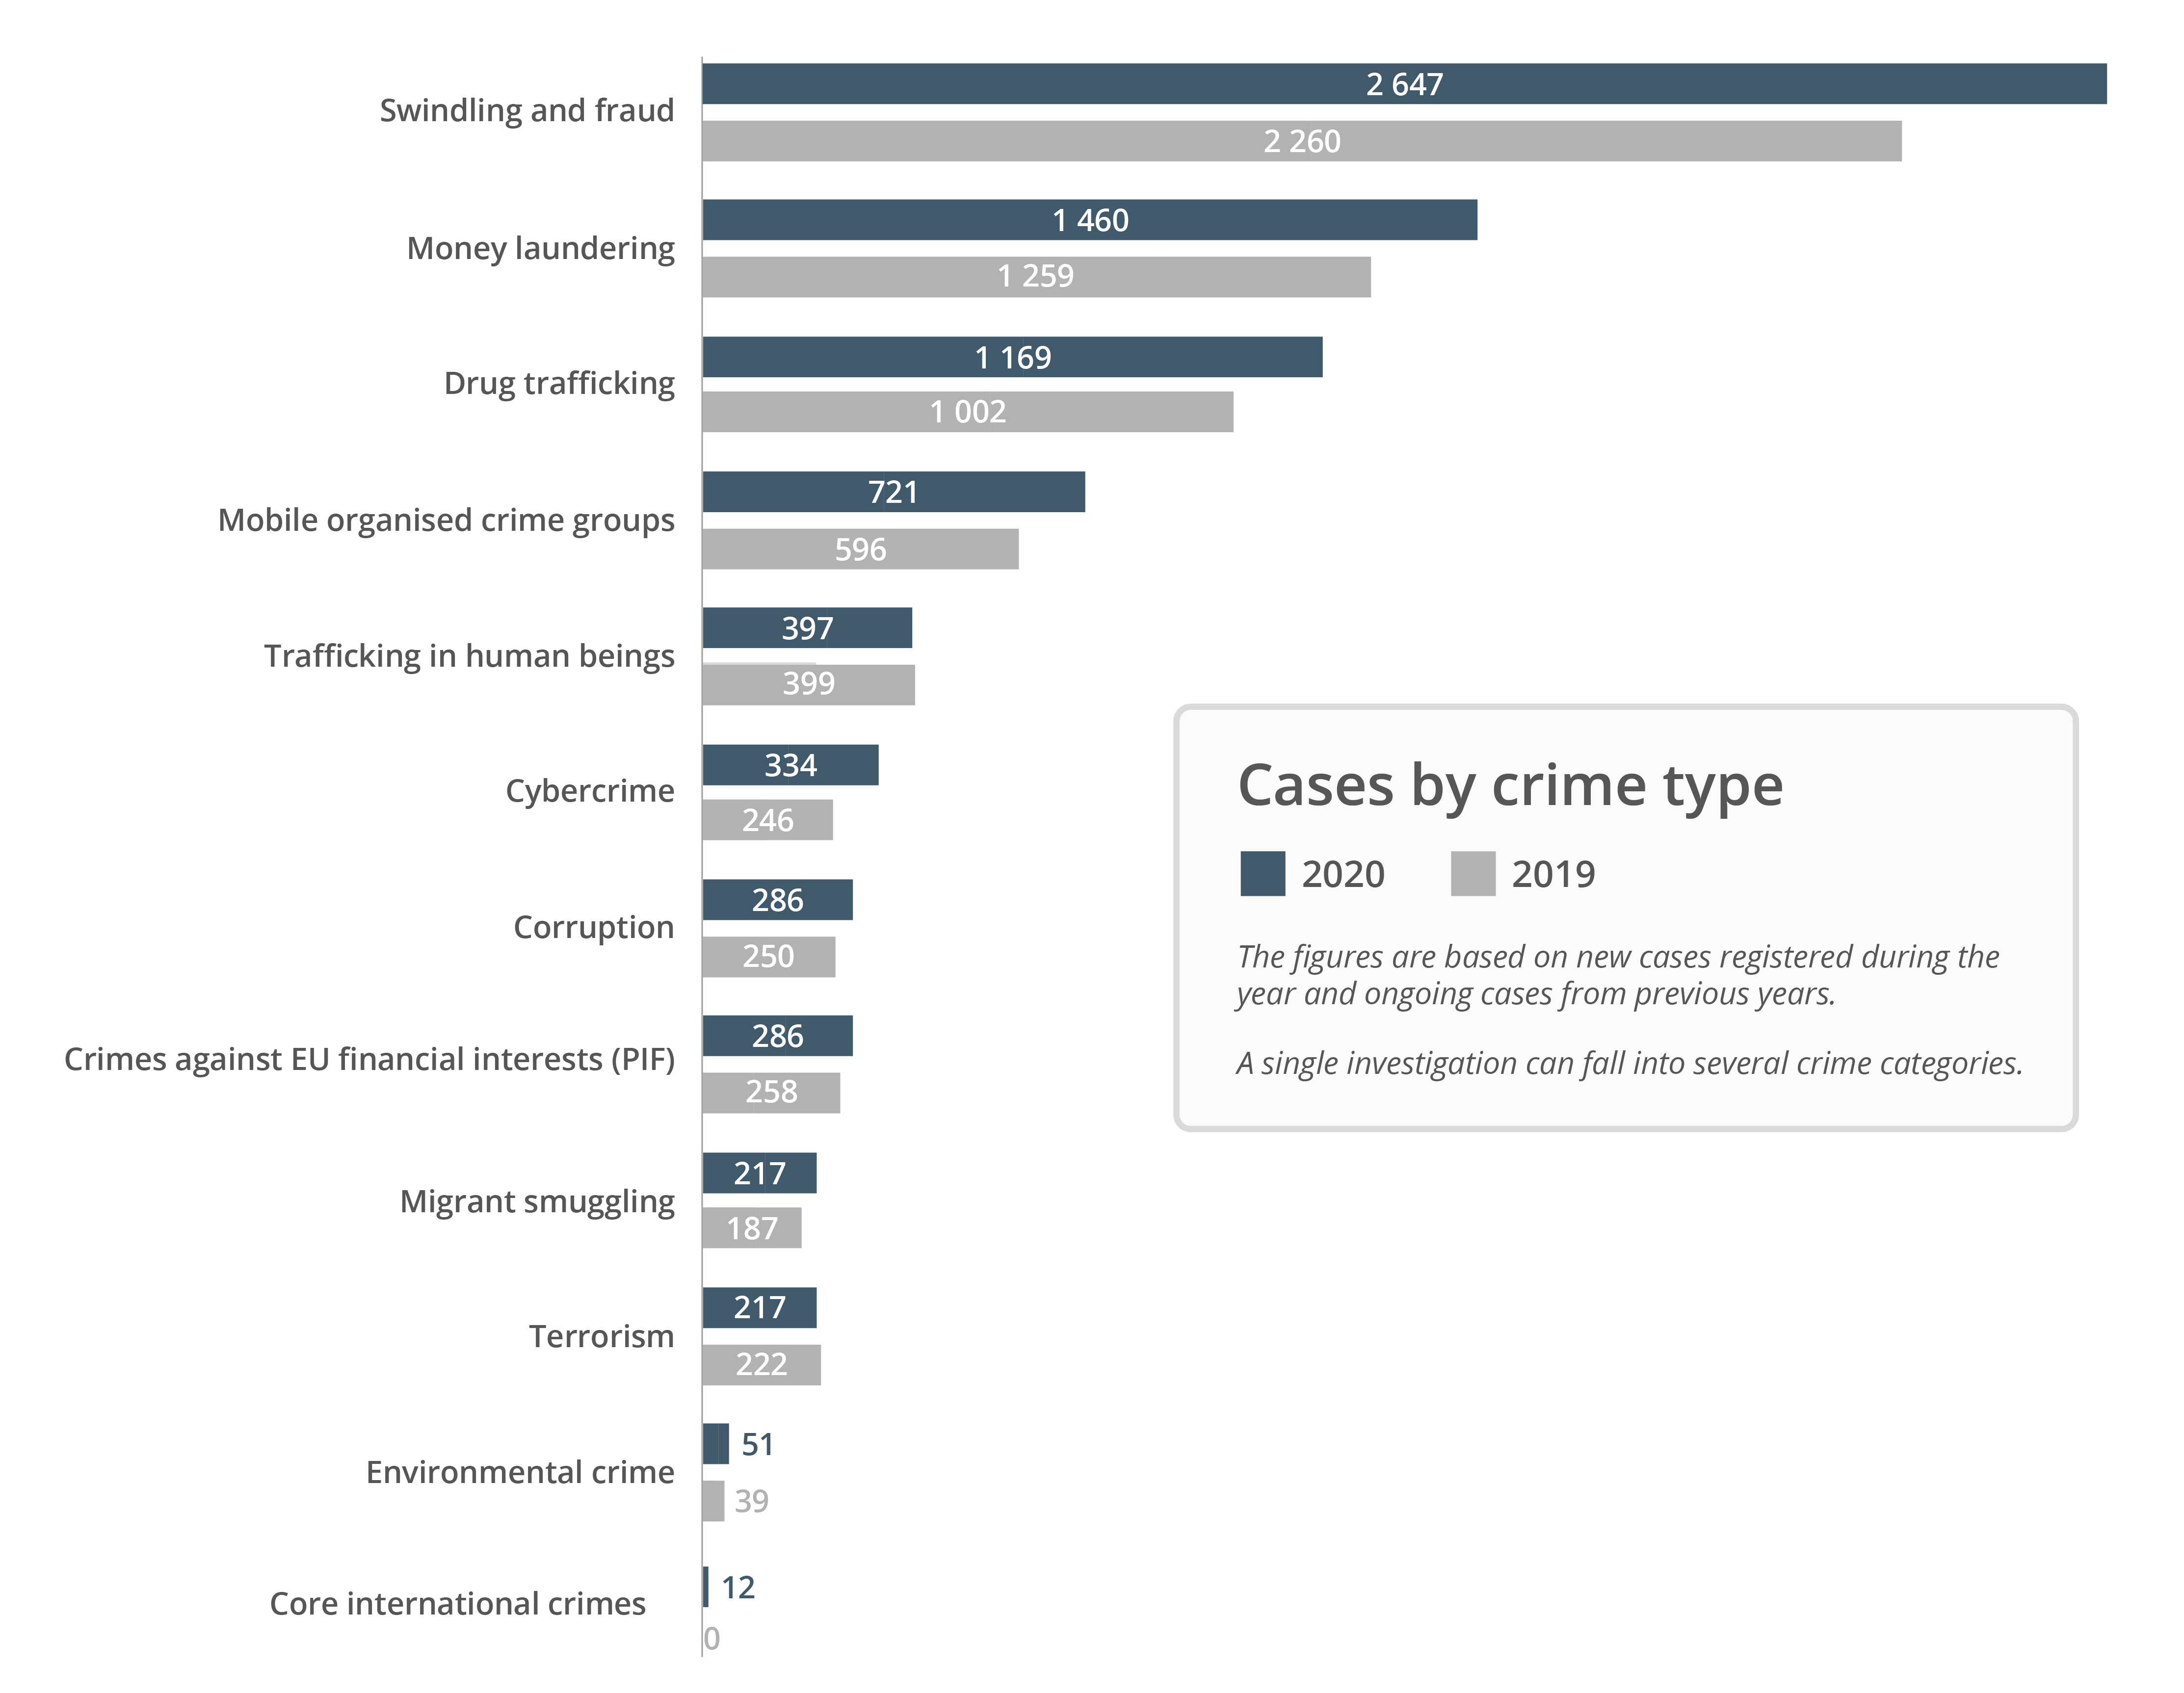 Cases by crime type 2019-2020